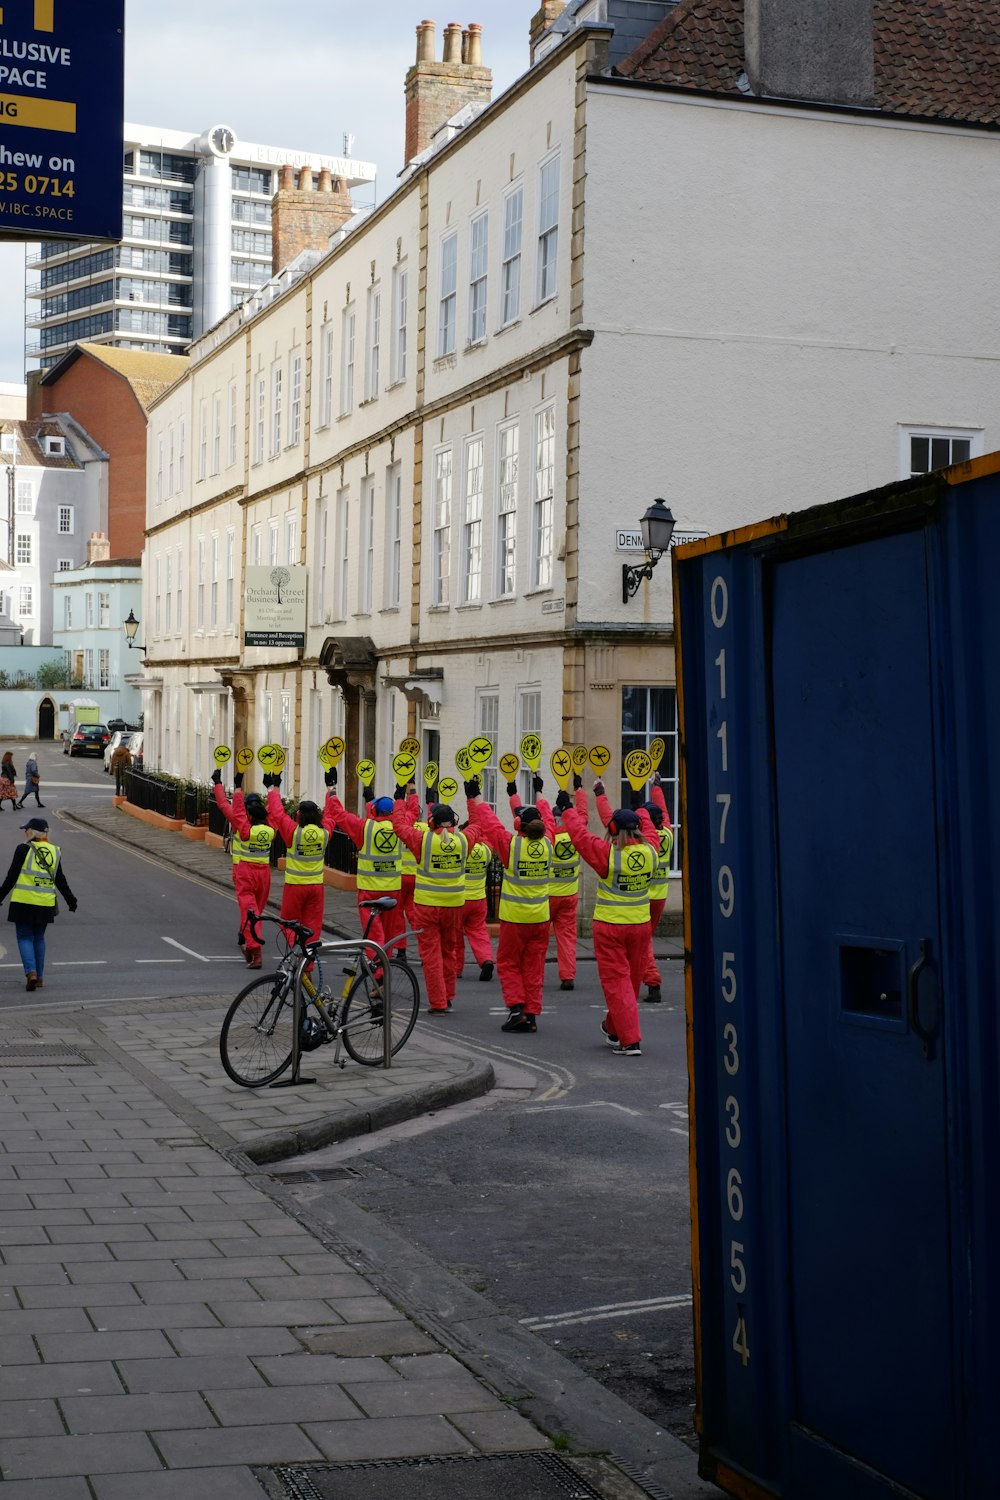 a group of people in red and yellow uniforms on a street